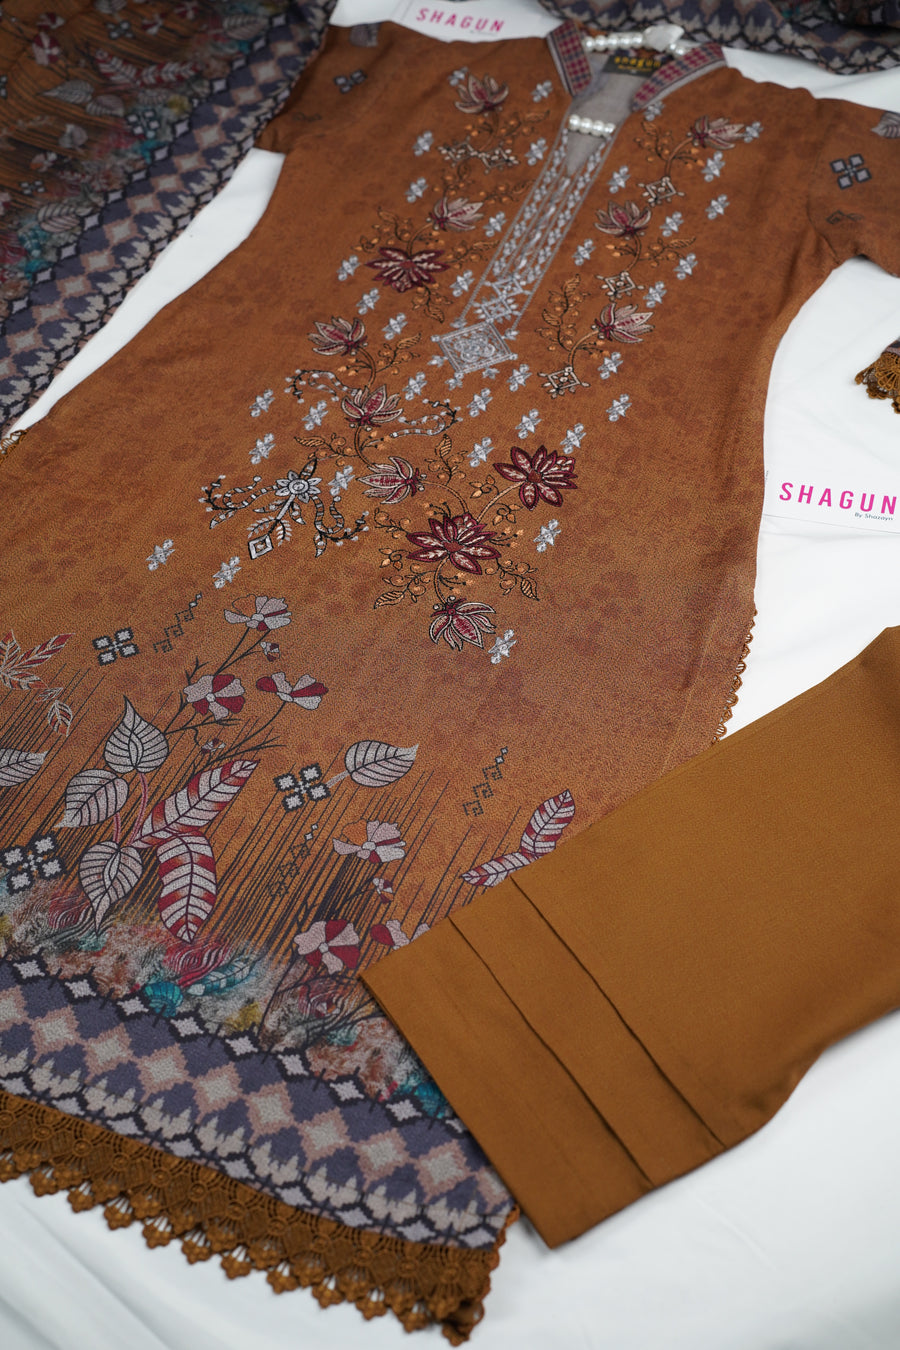 BAHAR VOL 3 WINTER COLLECTION WITH SHAWL